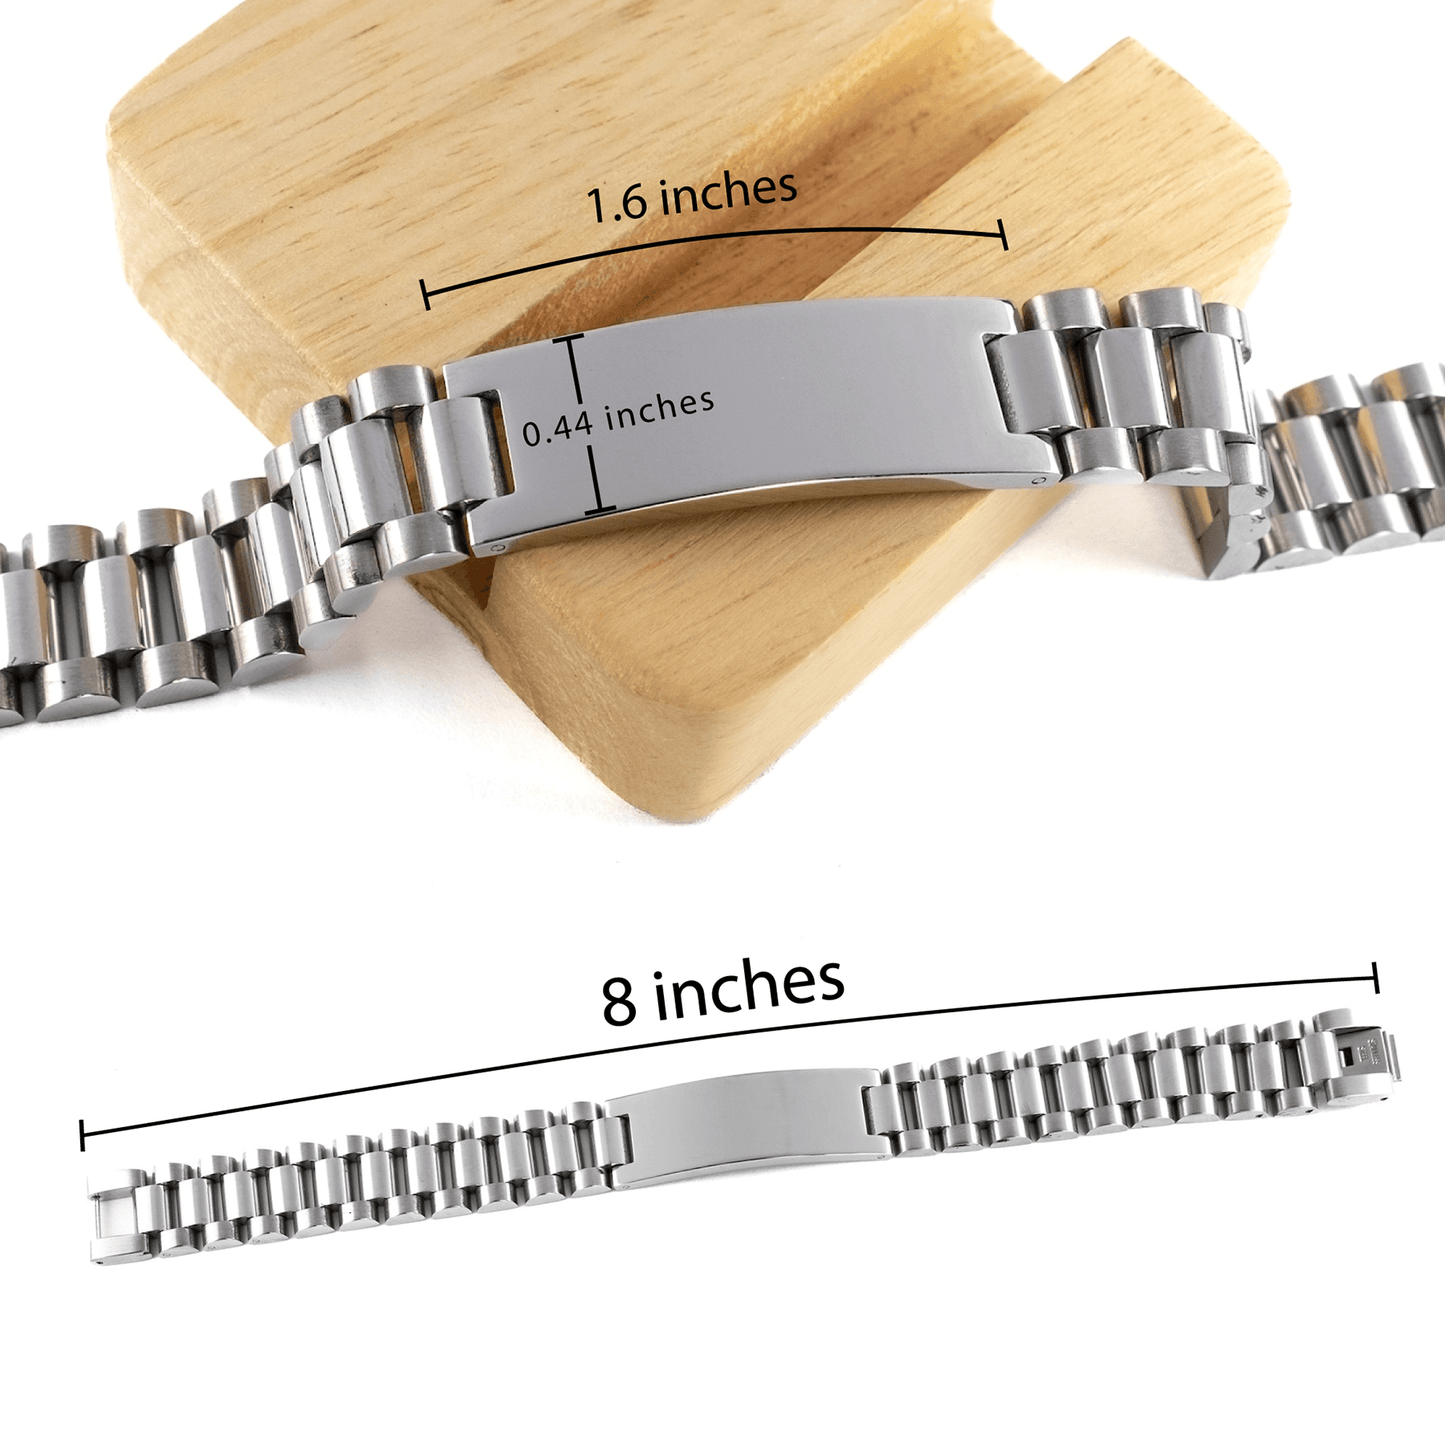 Fabricator Ladder Stainless Steel Engraved Bracelet - Thanks for being who you are - Birthday Christmas Jewelry Gifts Coworkers Colleague Boss - Mallard Moon Gift Shop